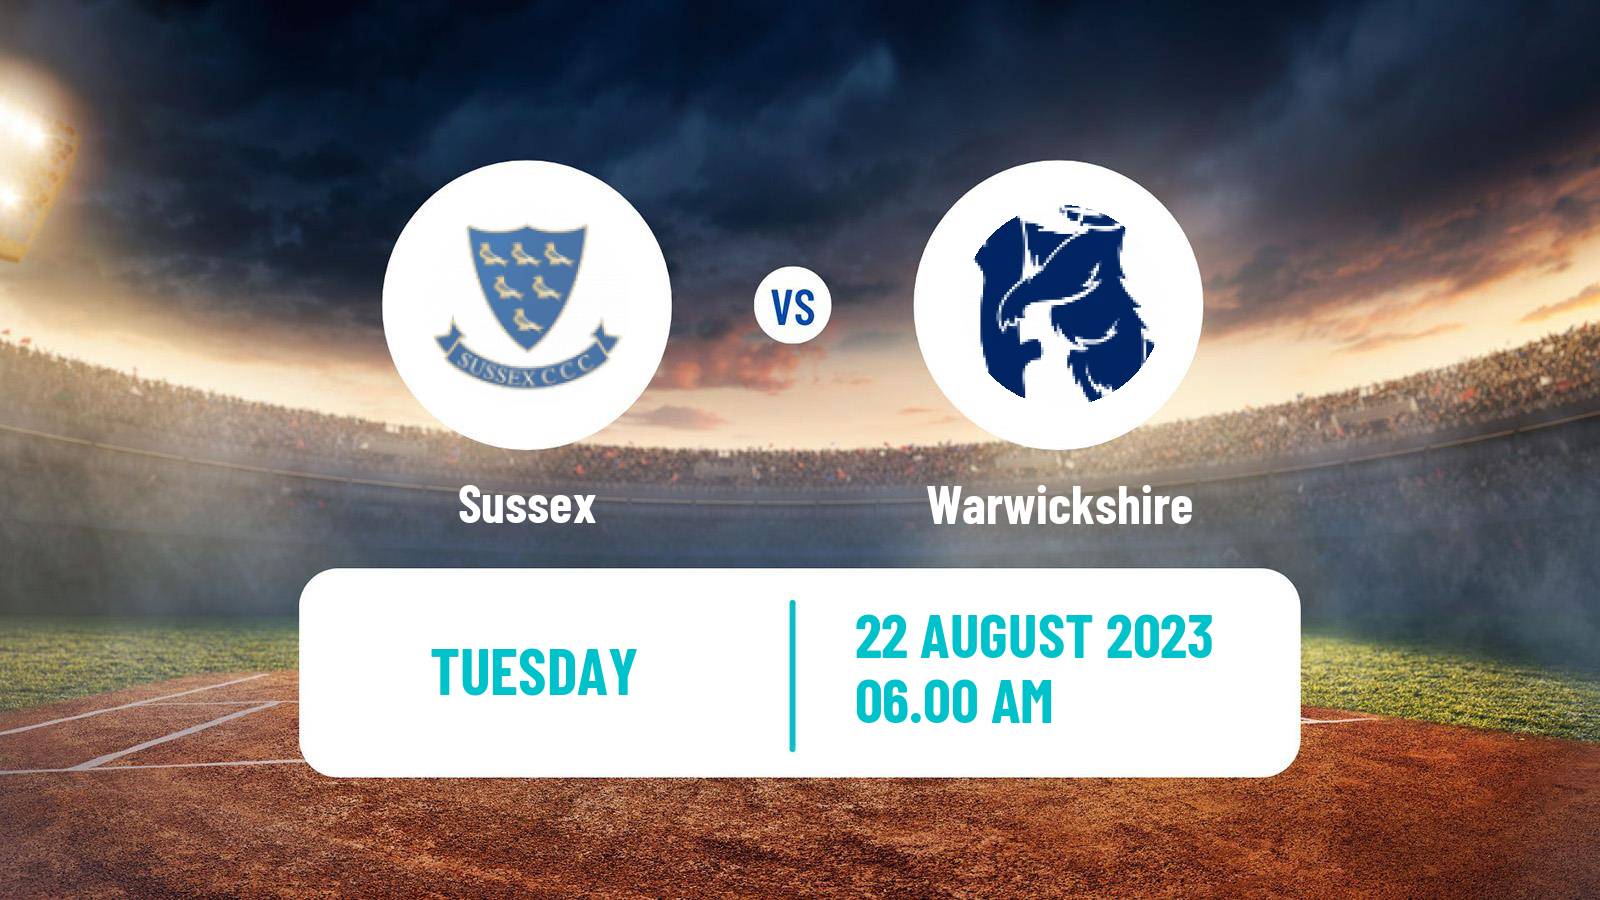 Cricket Royal London One-Day Cup Sussex - Warwickshire